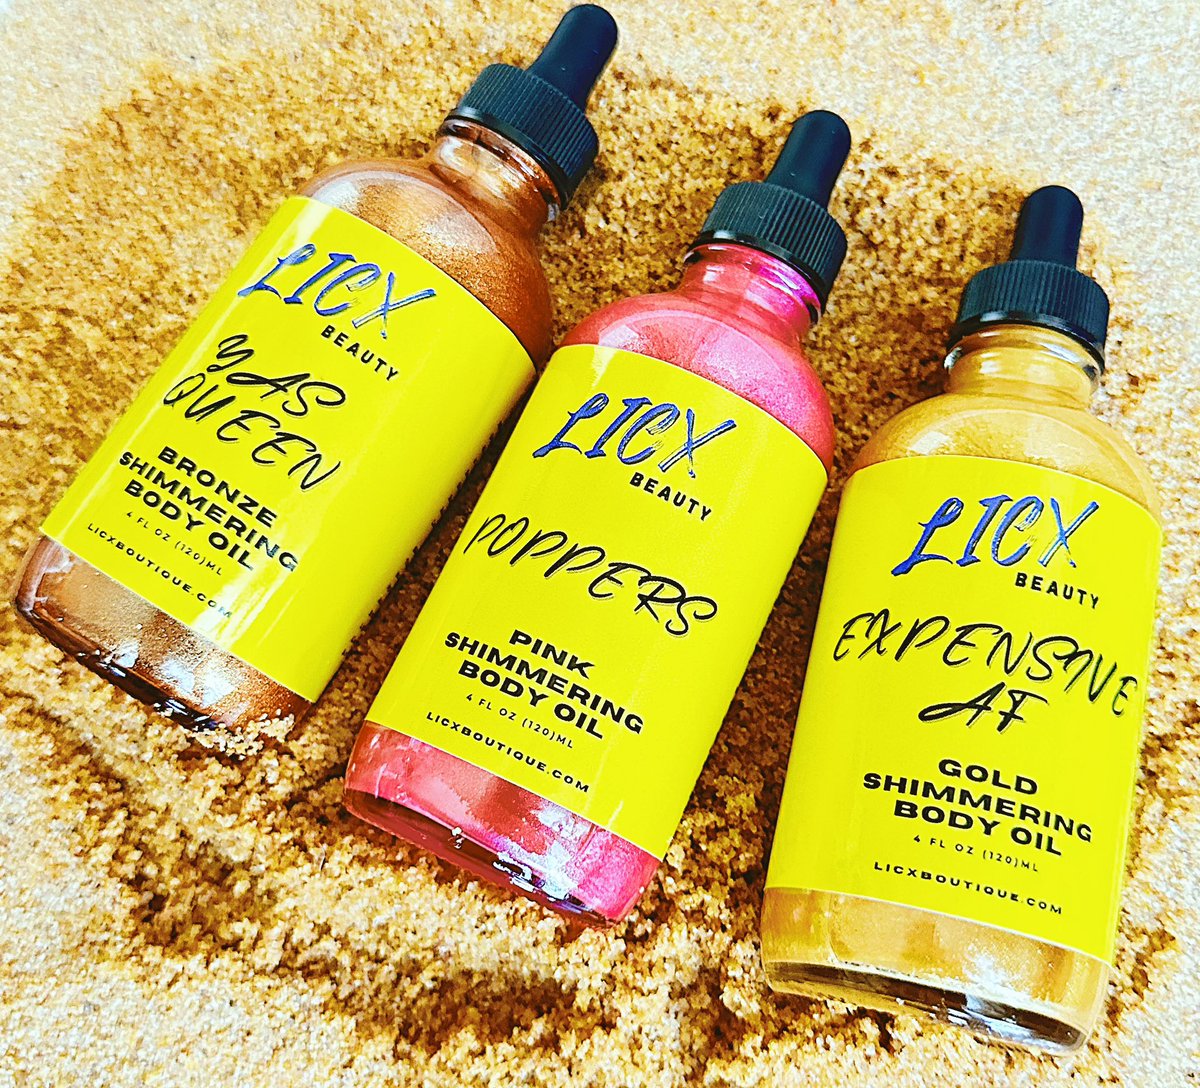 Glow All Summer Long 😍 Our Luxurious Shimmering Body Oils Are Available Now. Shop LicxBoutique.com 🛍️ @licxbeauty 

#shimmer #shimmeringbodyoil #bodyglow #bodyoil #bodyoils #gold #bronze #pink #summer #glow